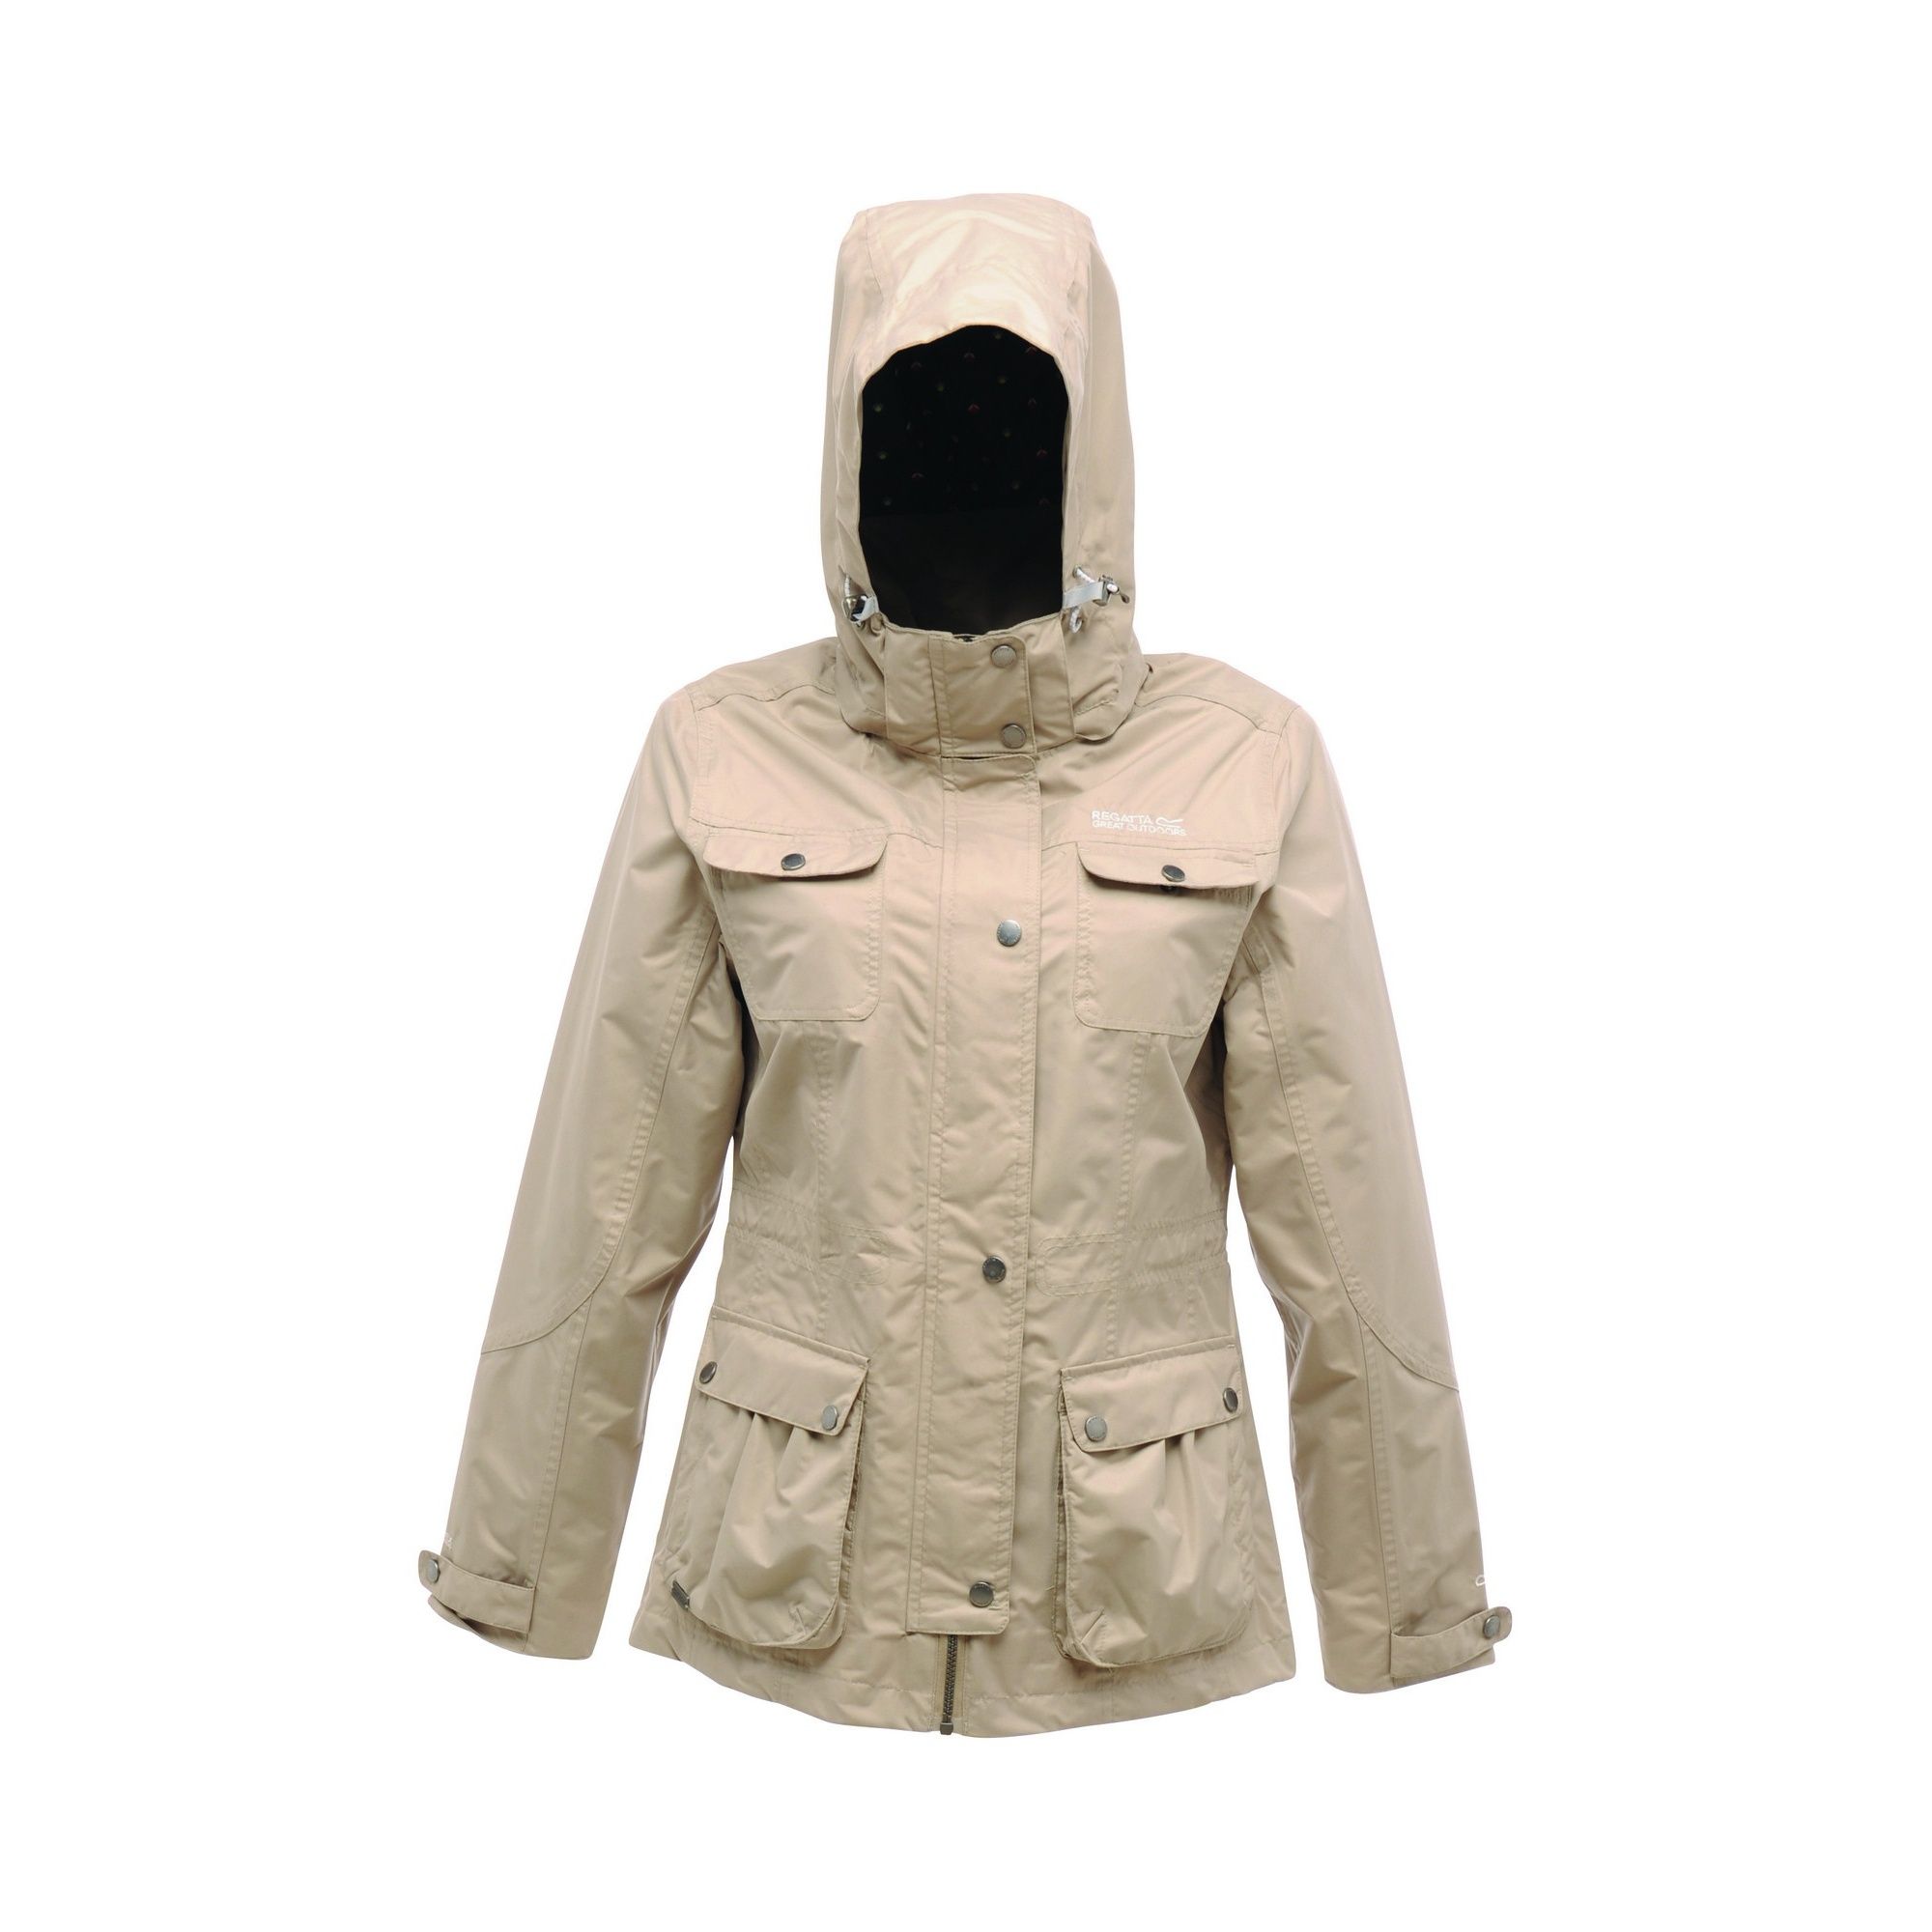 The High Spirits is our casual styled waterproof and breathable rain jacket, with classic colours and styling that look the part for weekday living and weekend jaunts. Its crafted from our ISOTEX 5,000 fabric with taped seams to make sure the rain doesnt sneak in and it features a handy zip-off hood for dry spells. Both the waist and cuffs can be adjusted to slim the fit and it has four handy pockets with press stud fastenings. We have finished it with a cute print lining in the hood for a summery pop of colour. 100% Polyester. Regatta Womens sizing (bust approx): 6 (30in/76cm), 8 (32in/81cm), 10 (34in/86cm), 12 (36in/92cm), 14 (38in/97cm), 16 (40in/102cm), 18 (43in/109cm), 20 (45in/114cm), 22 (48in/122cm), 24 (50in/127cm), 26 (52in/132cm), 28 (54in/137cm), 30 (56in/142cm), 32 (58in/147cm), 34 (60in/152cm), 36 (62in/158cm).